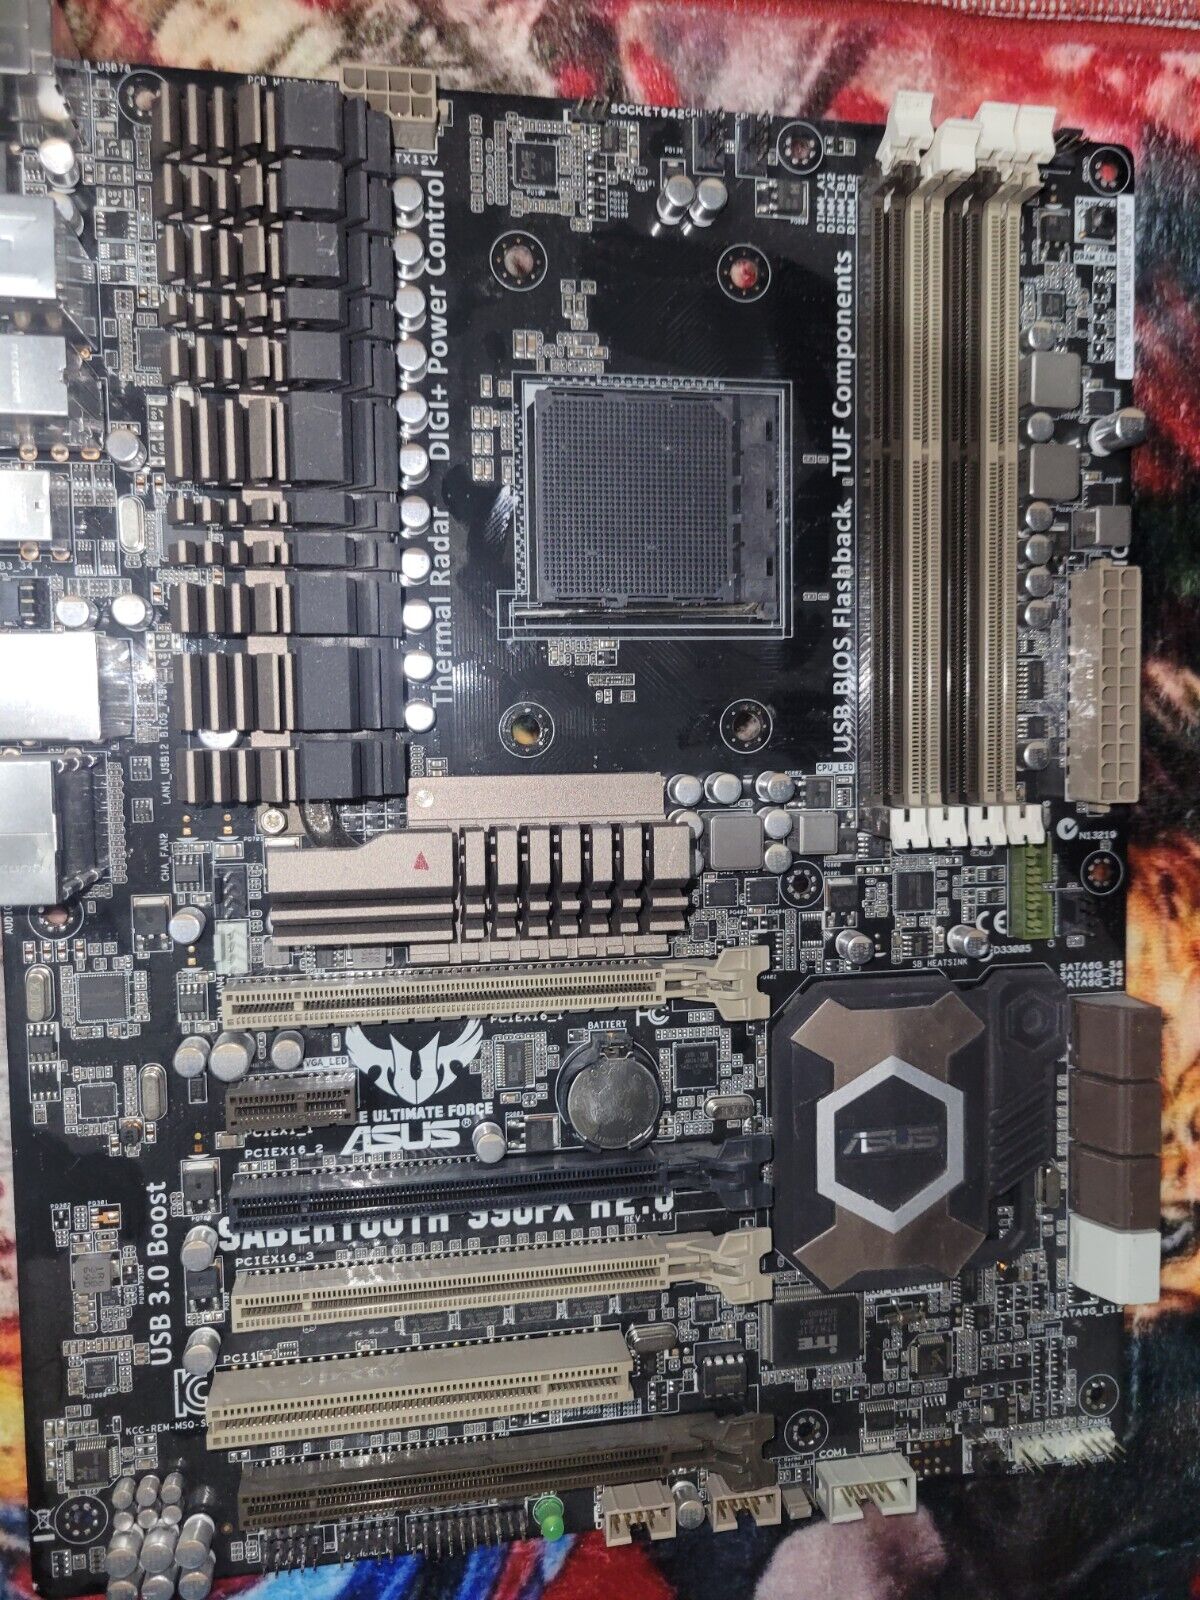 ASUS Sabertooth 990FX R2.0 AM3+ DDR3 ATX Motherboard (FOR PARTS OR REPAIR)